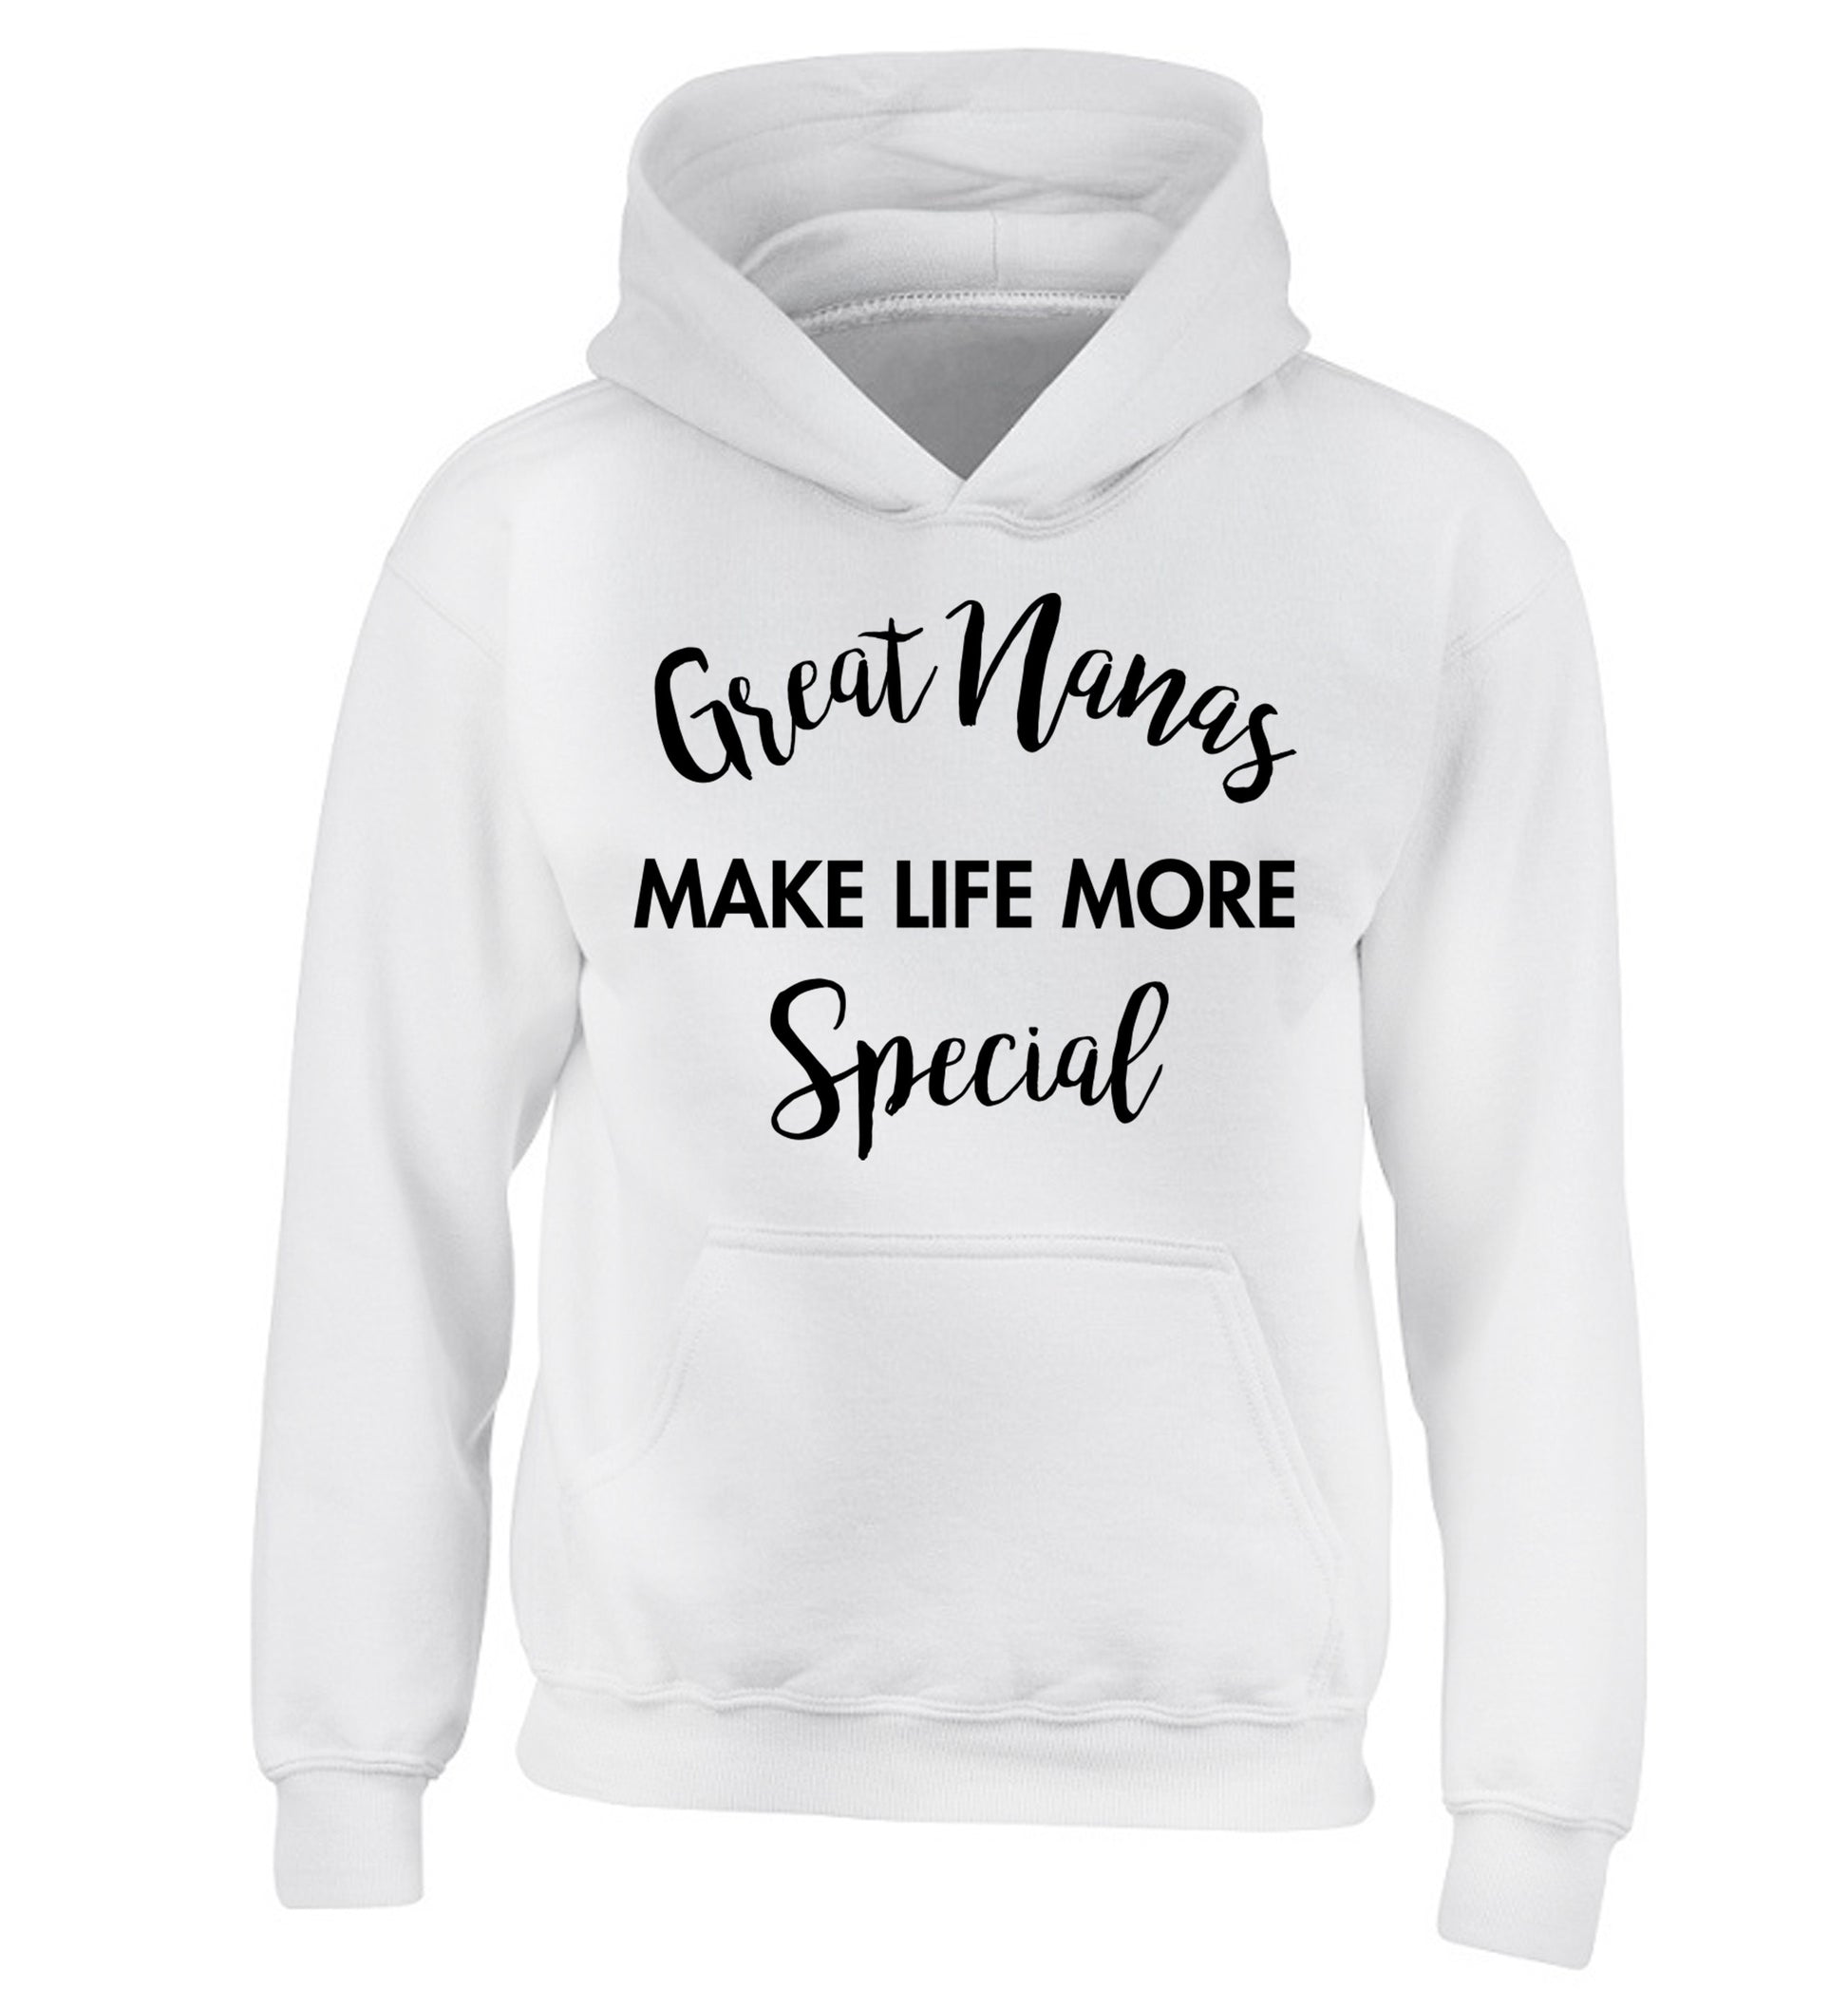 Great nanas make life more special children's white hoodie 12-14 Years